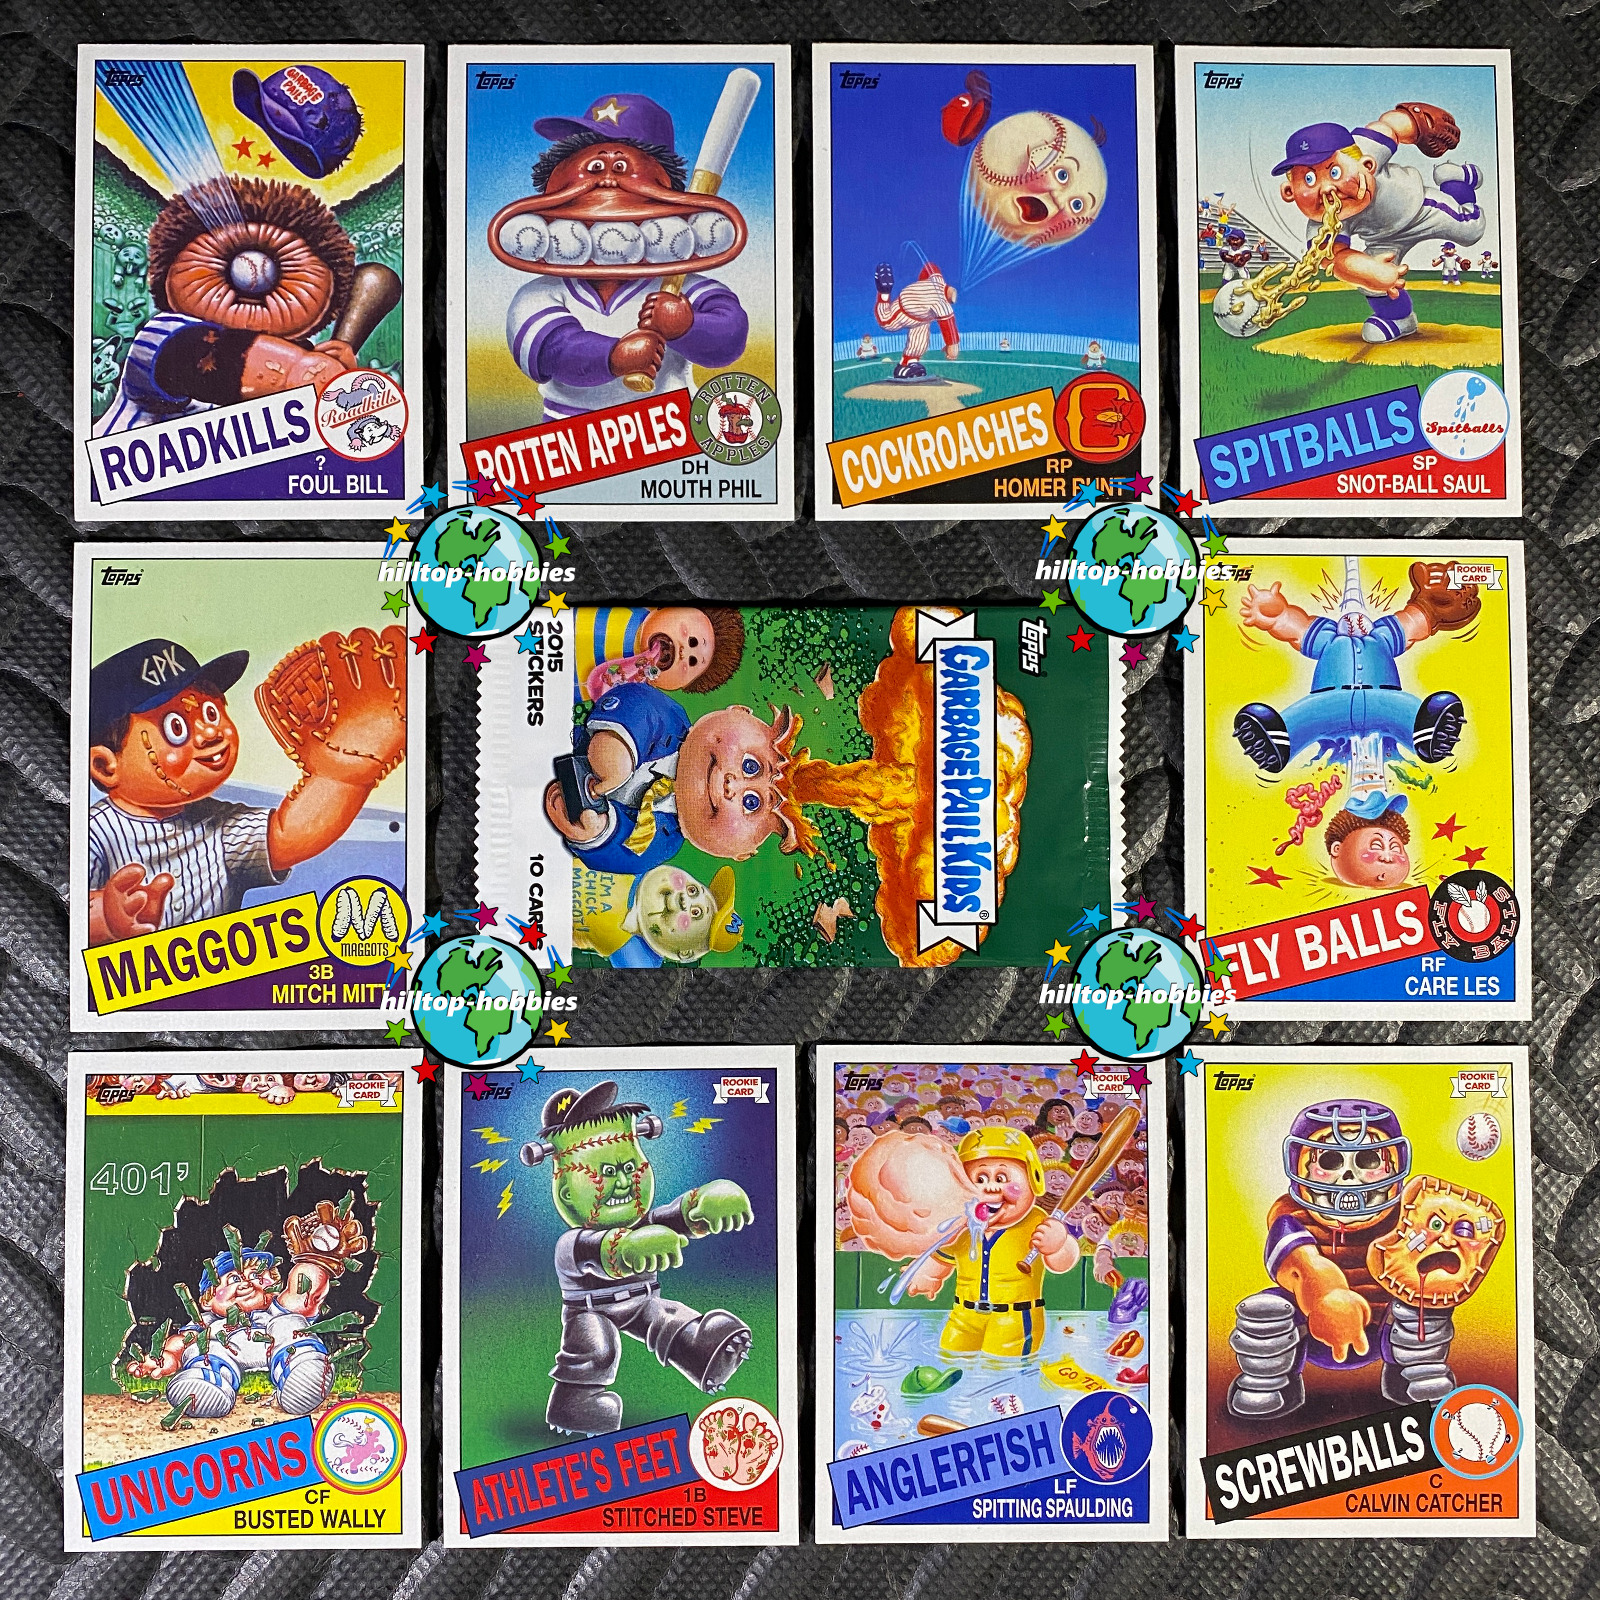 GARBAGE PAIL KIDS 2015 1ST SERIES 1 COMPLETE BASEBALL CARD SET OF 10 +WRAPPER